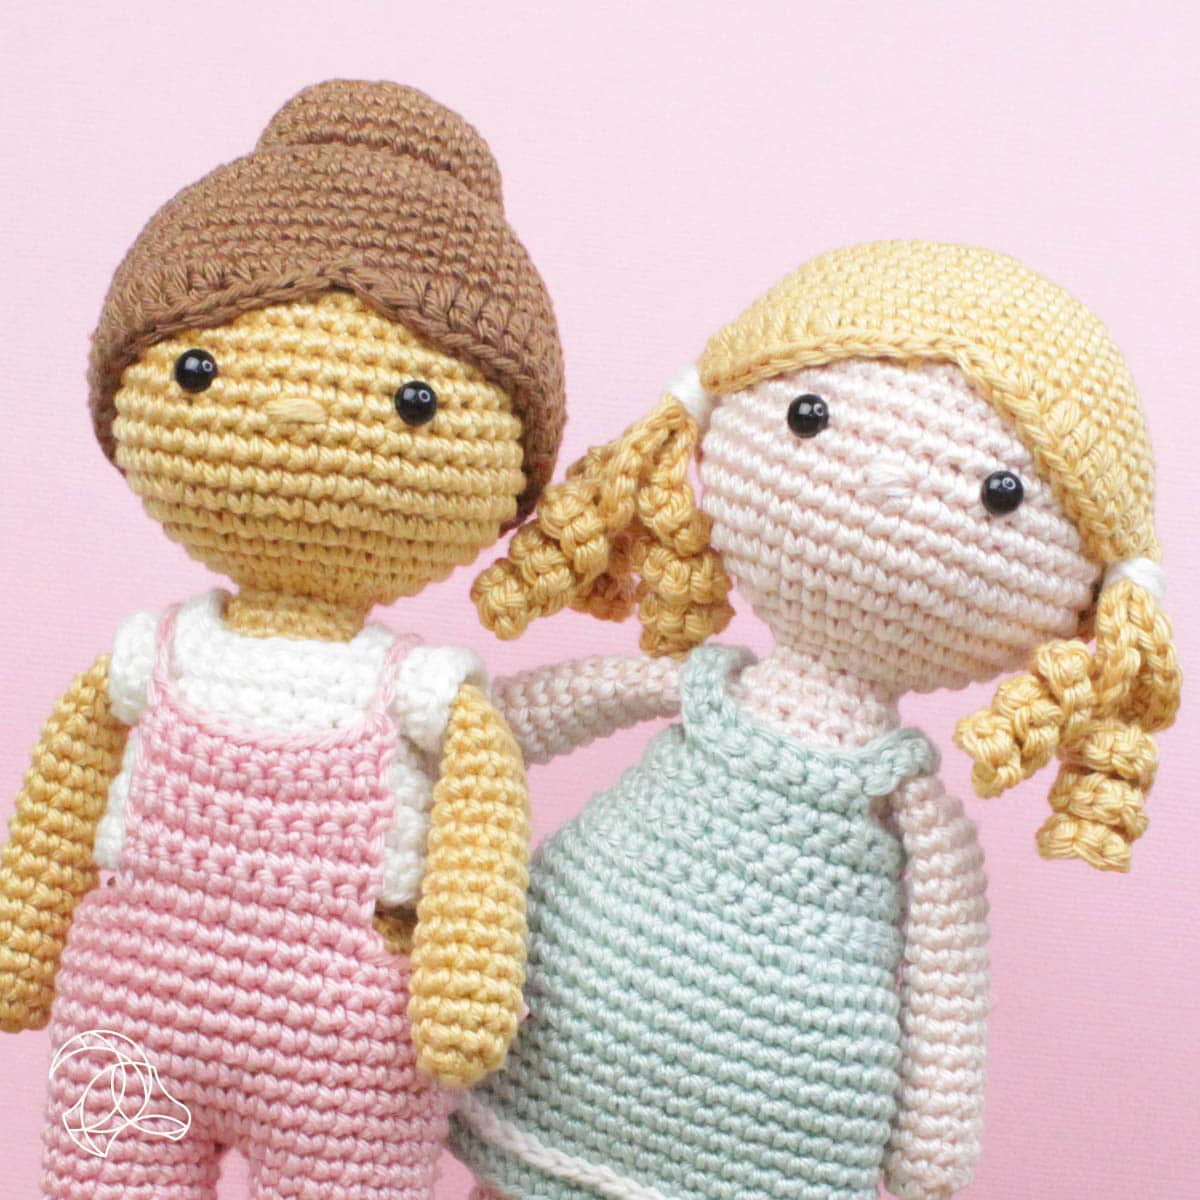 Little Girl in Pink Dungarees - Doll Crochet Kit - by Hardicraft